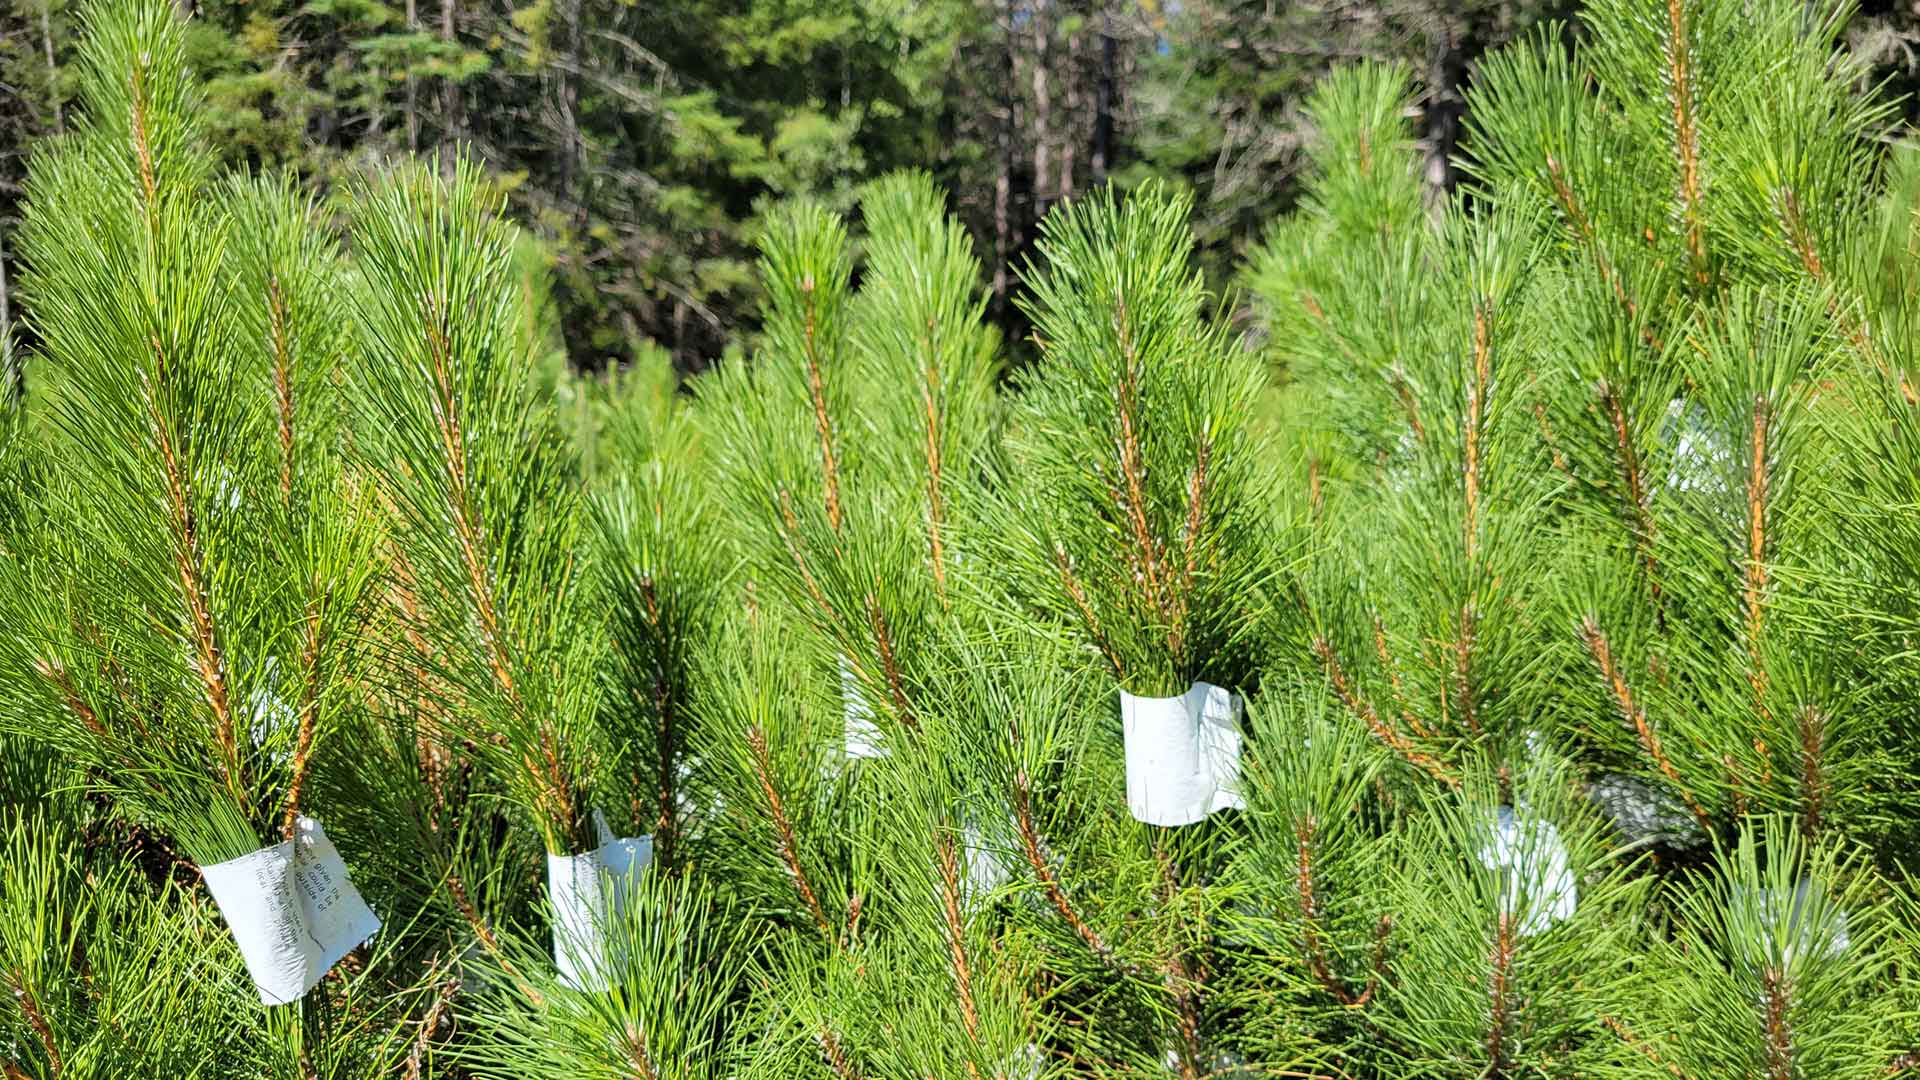 close-up photo of pine saplings with paper covering their growth buds